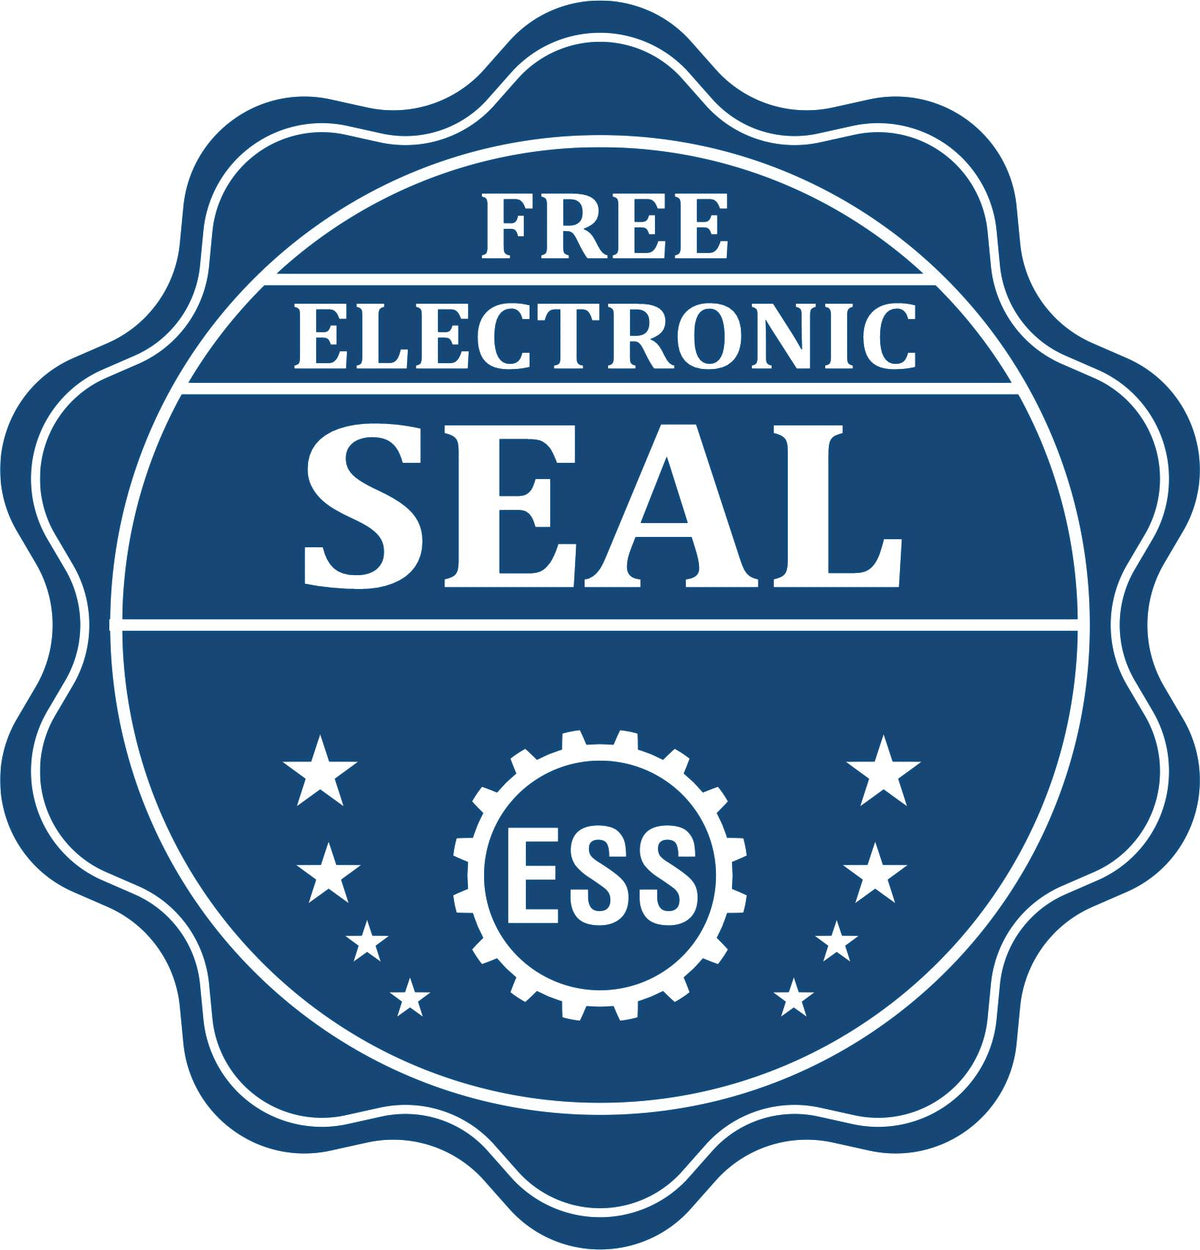 A badge showing a free electronic seal for the Super Slim Massachusetts Notary Public Stamp with stars and the ESS gear on the emblem.